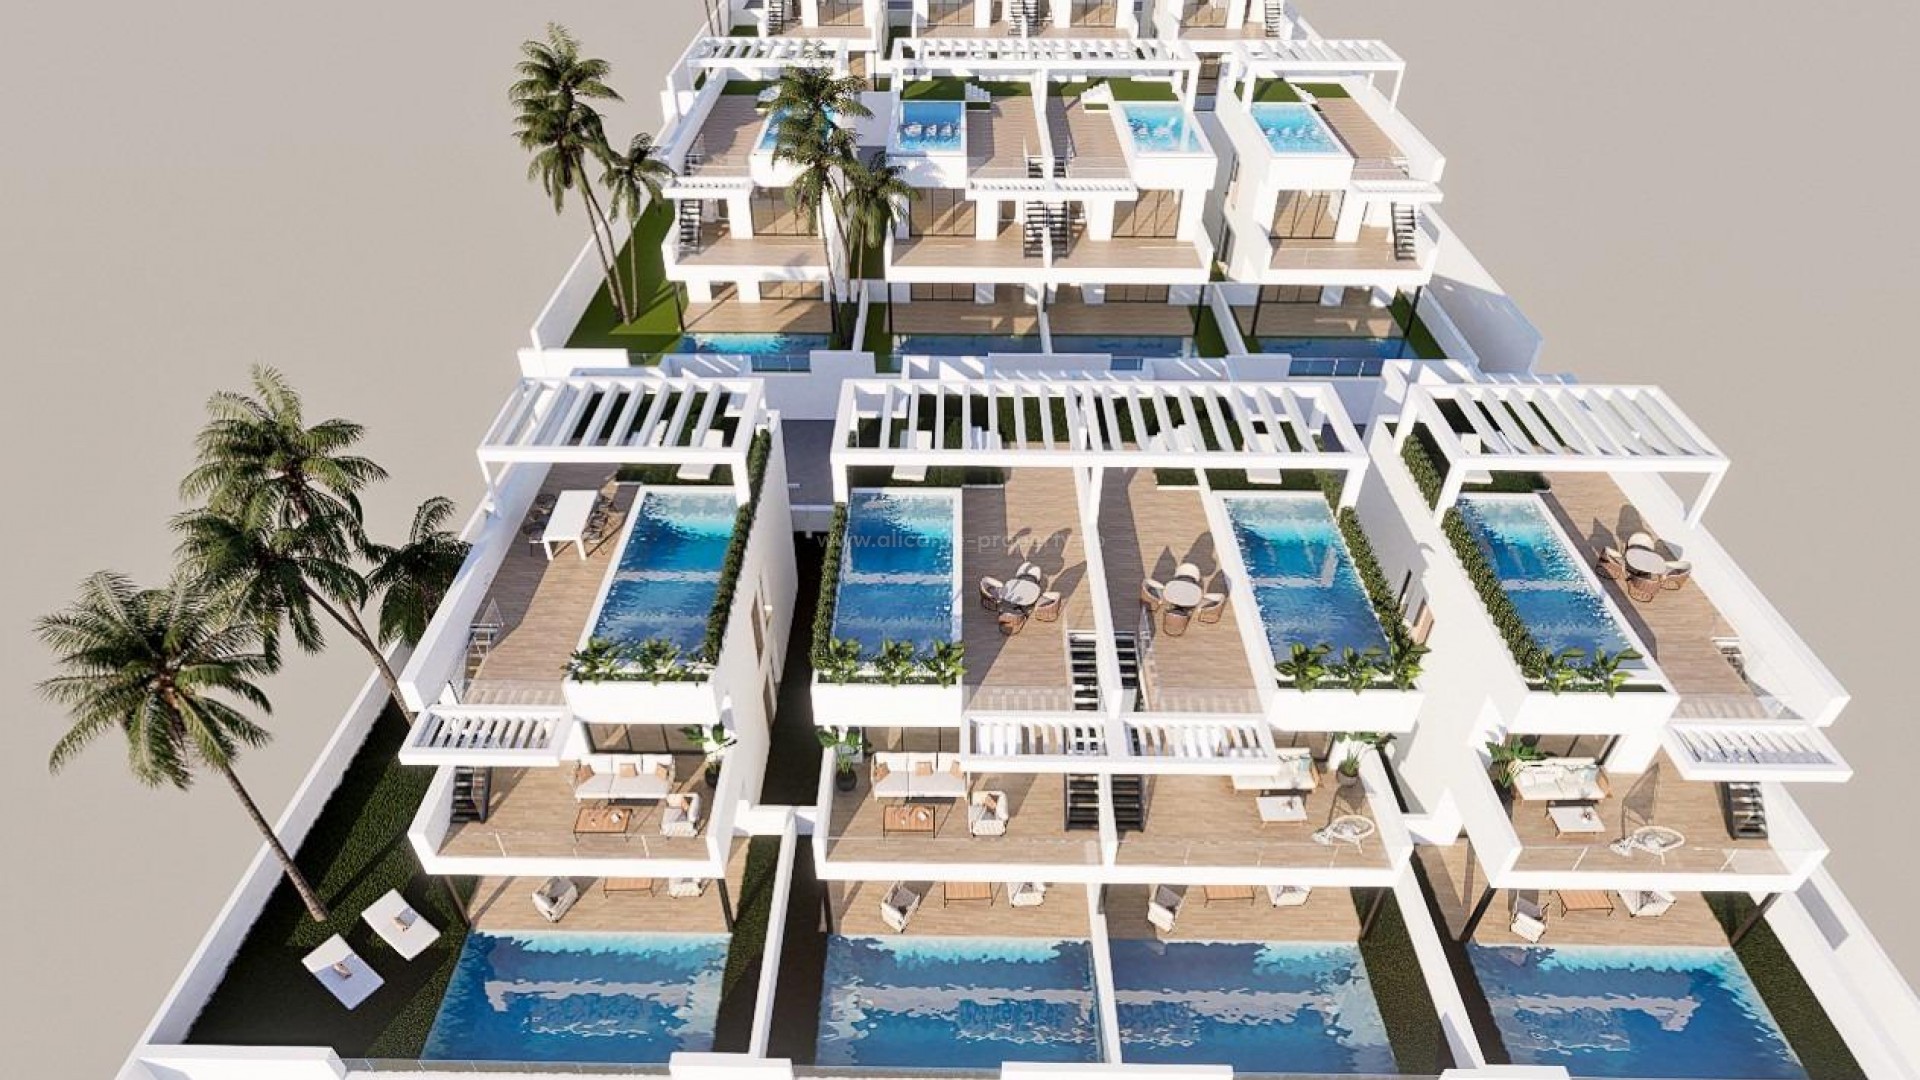 Residential complex in Finestrat, Alicante province, 2/3 bedrooms, 2 bathrooms, some apartments with fantastic views and some with pools, There are common areas